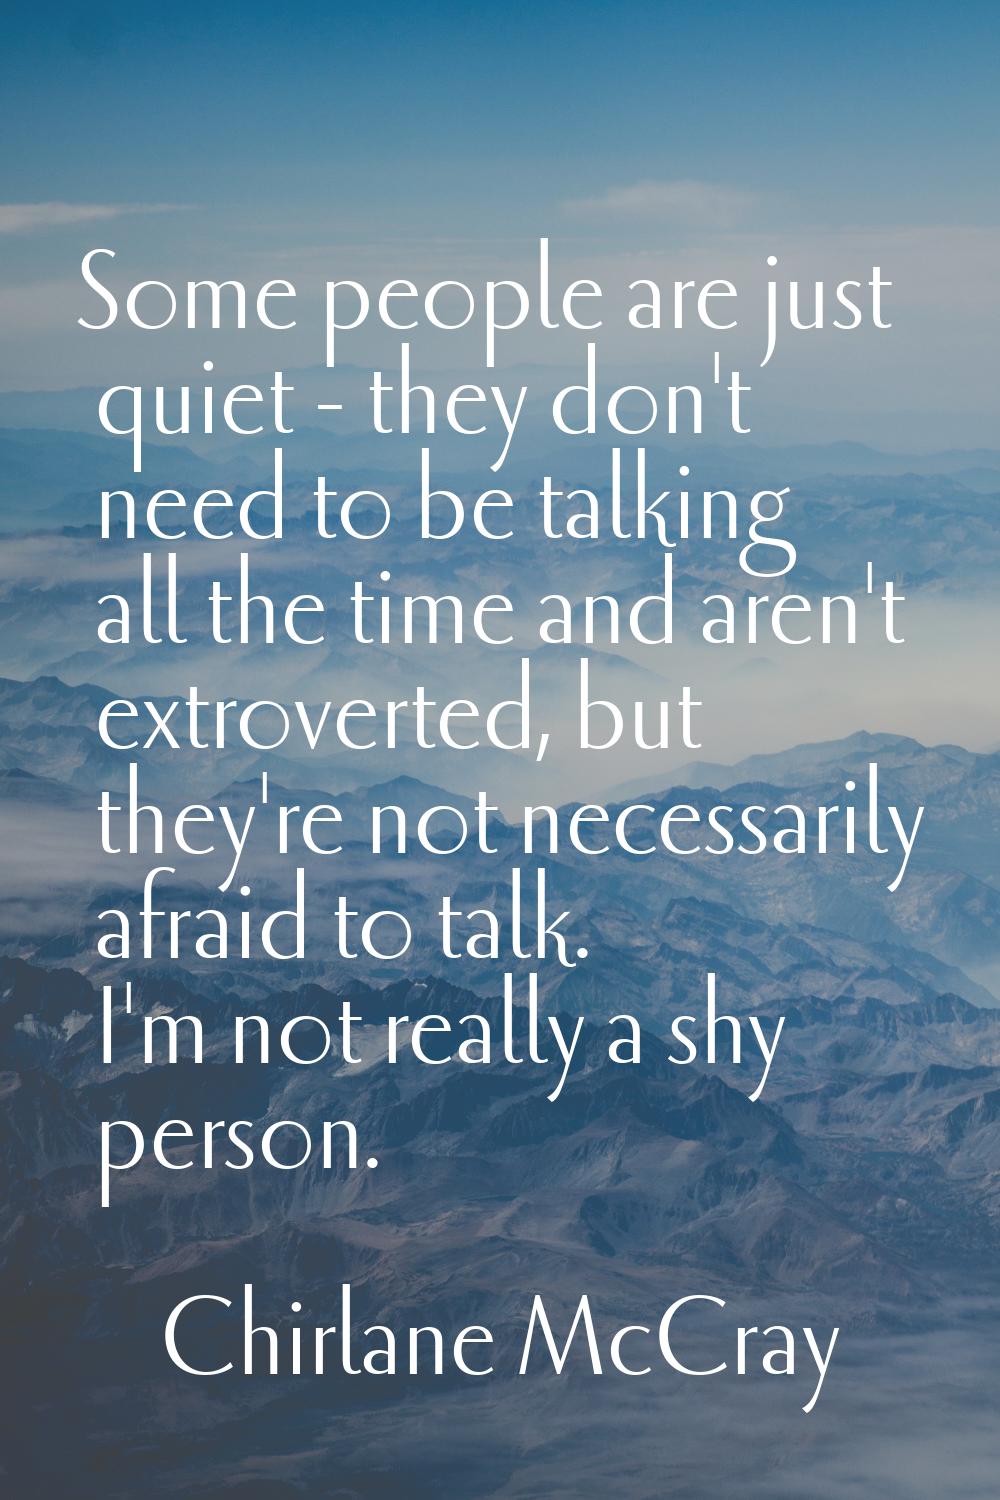 Some people are just quiet - they don't need to be talking all the time and aren't extroverted, but